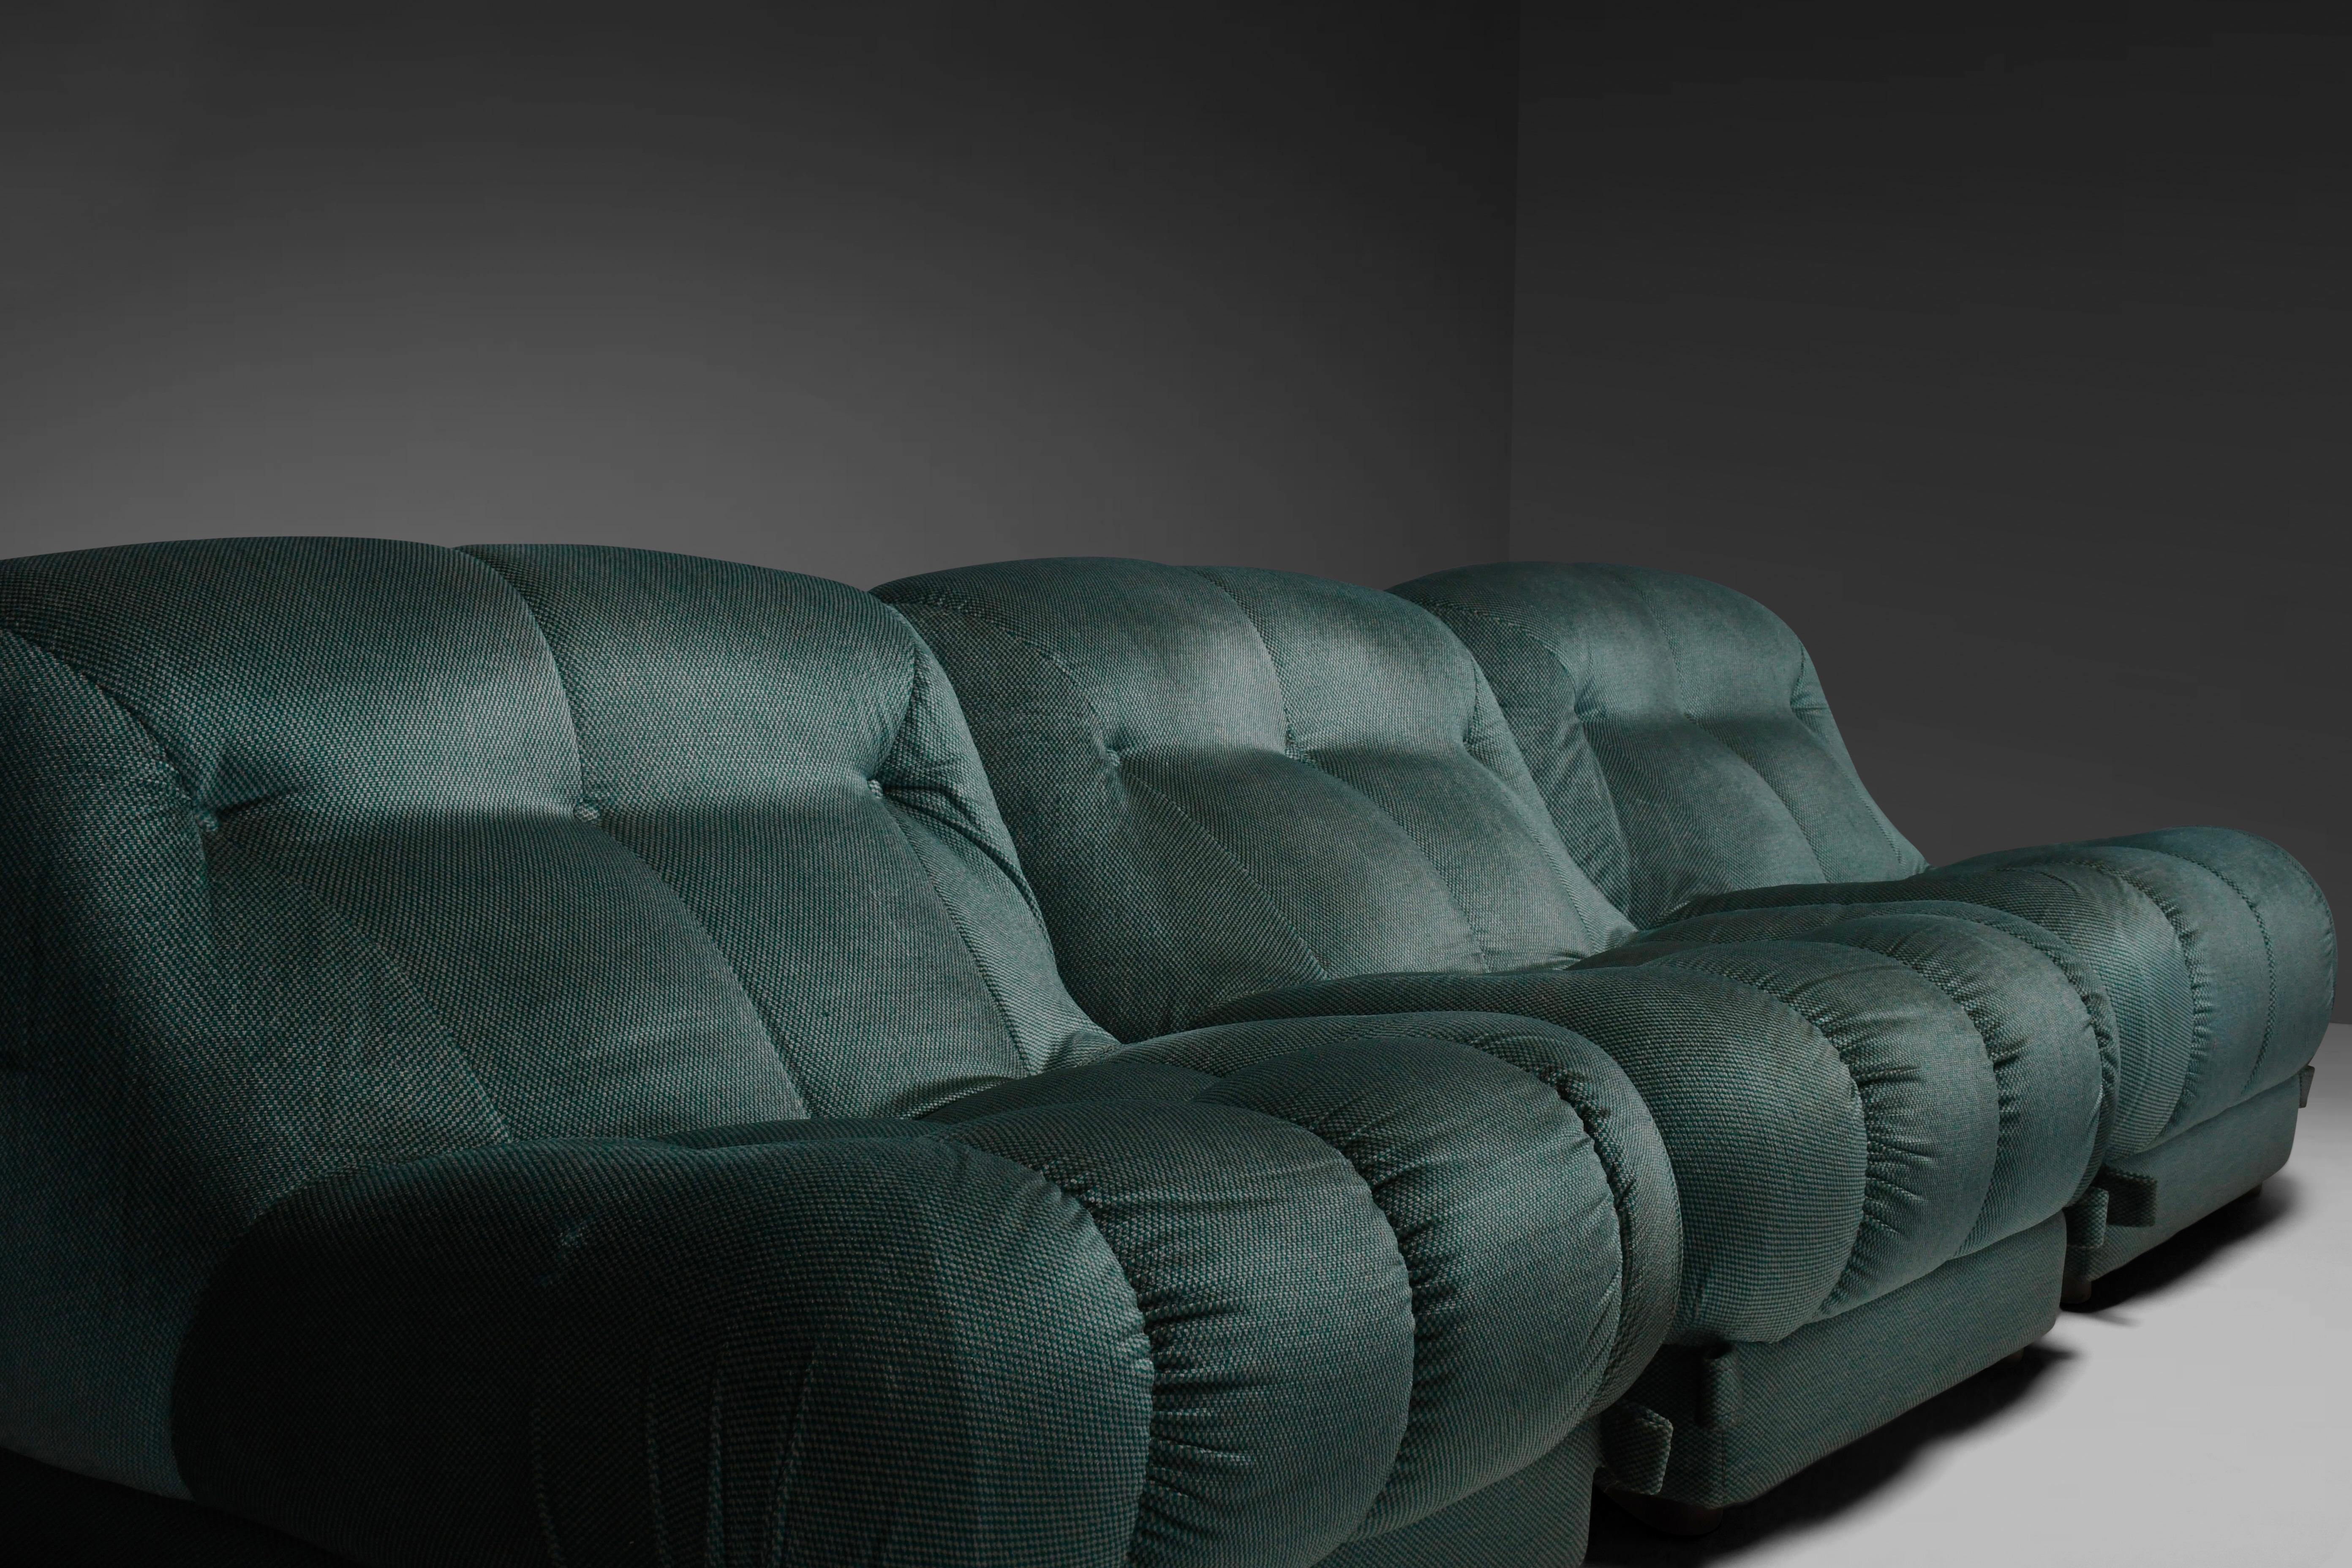 Large Modular Sectional ‘Nuvolone’ Sofa by Rino Maturi in Green Fabric, 1970s For Sale 5